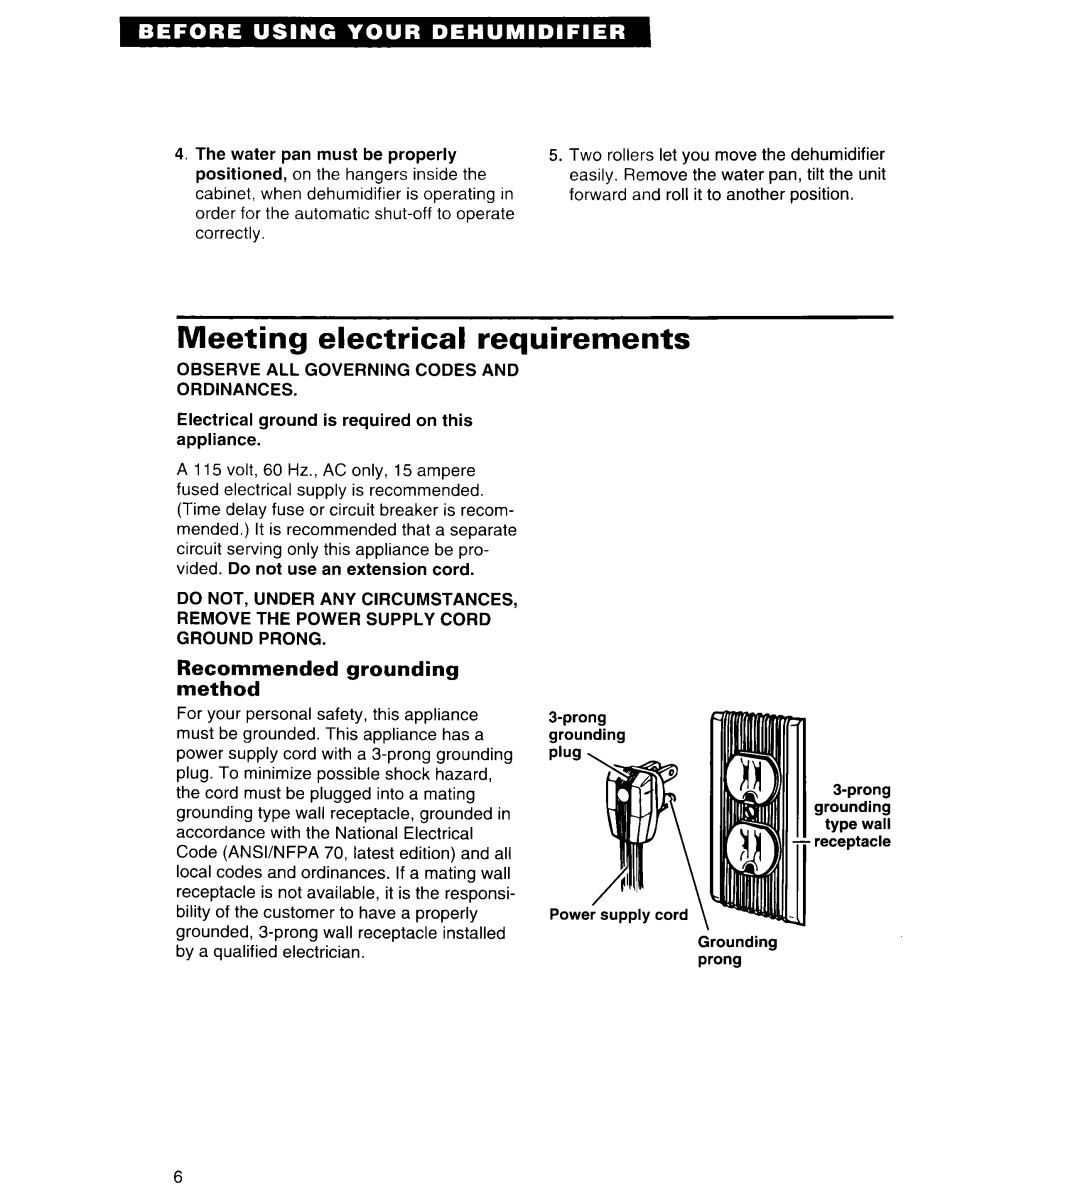 Whirlpool AD040, ADO25, AD050, AD030 Meeting electrical requirements, Recommended grounding method 